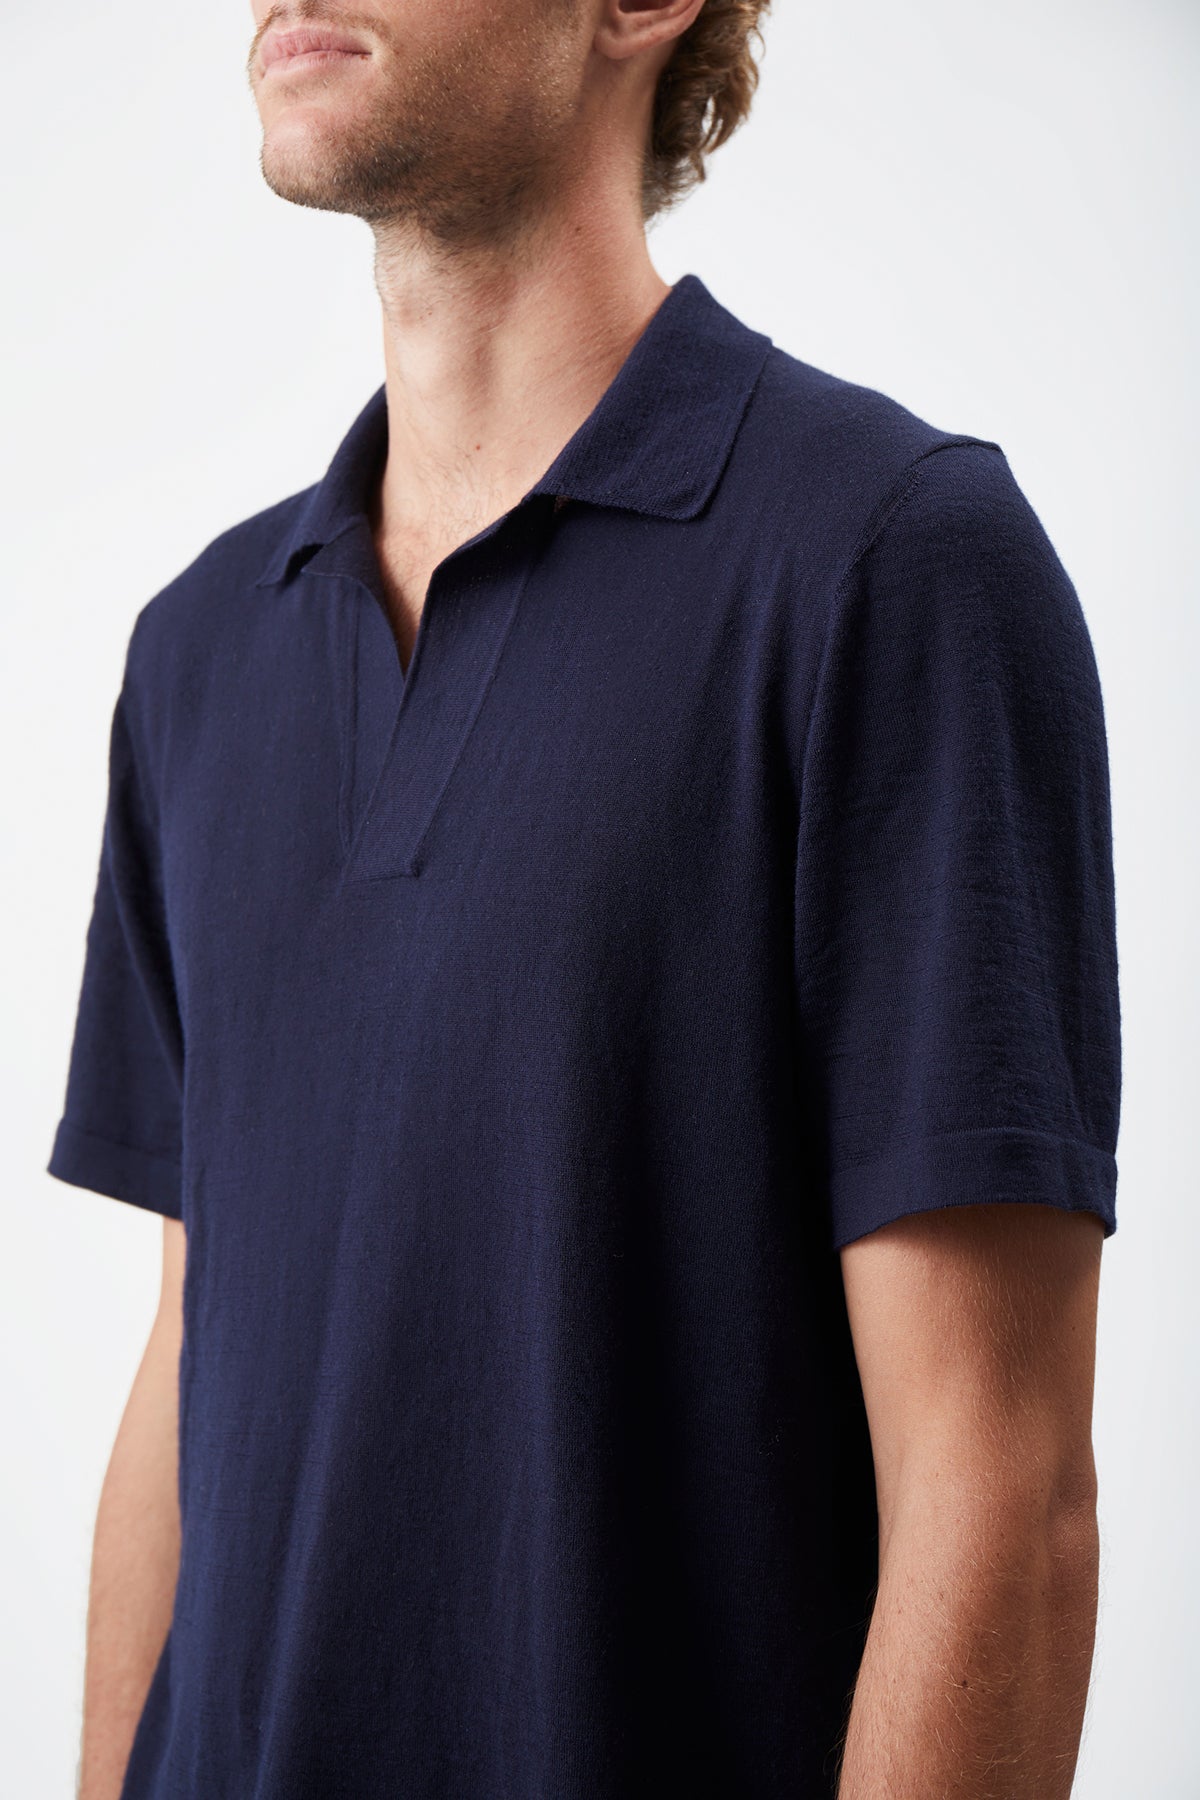 Stendhal Knit Short Sleeve Polo in Navy Cashmere